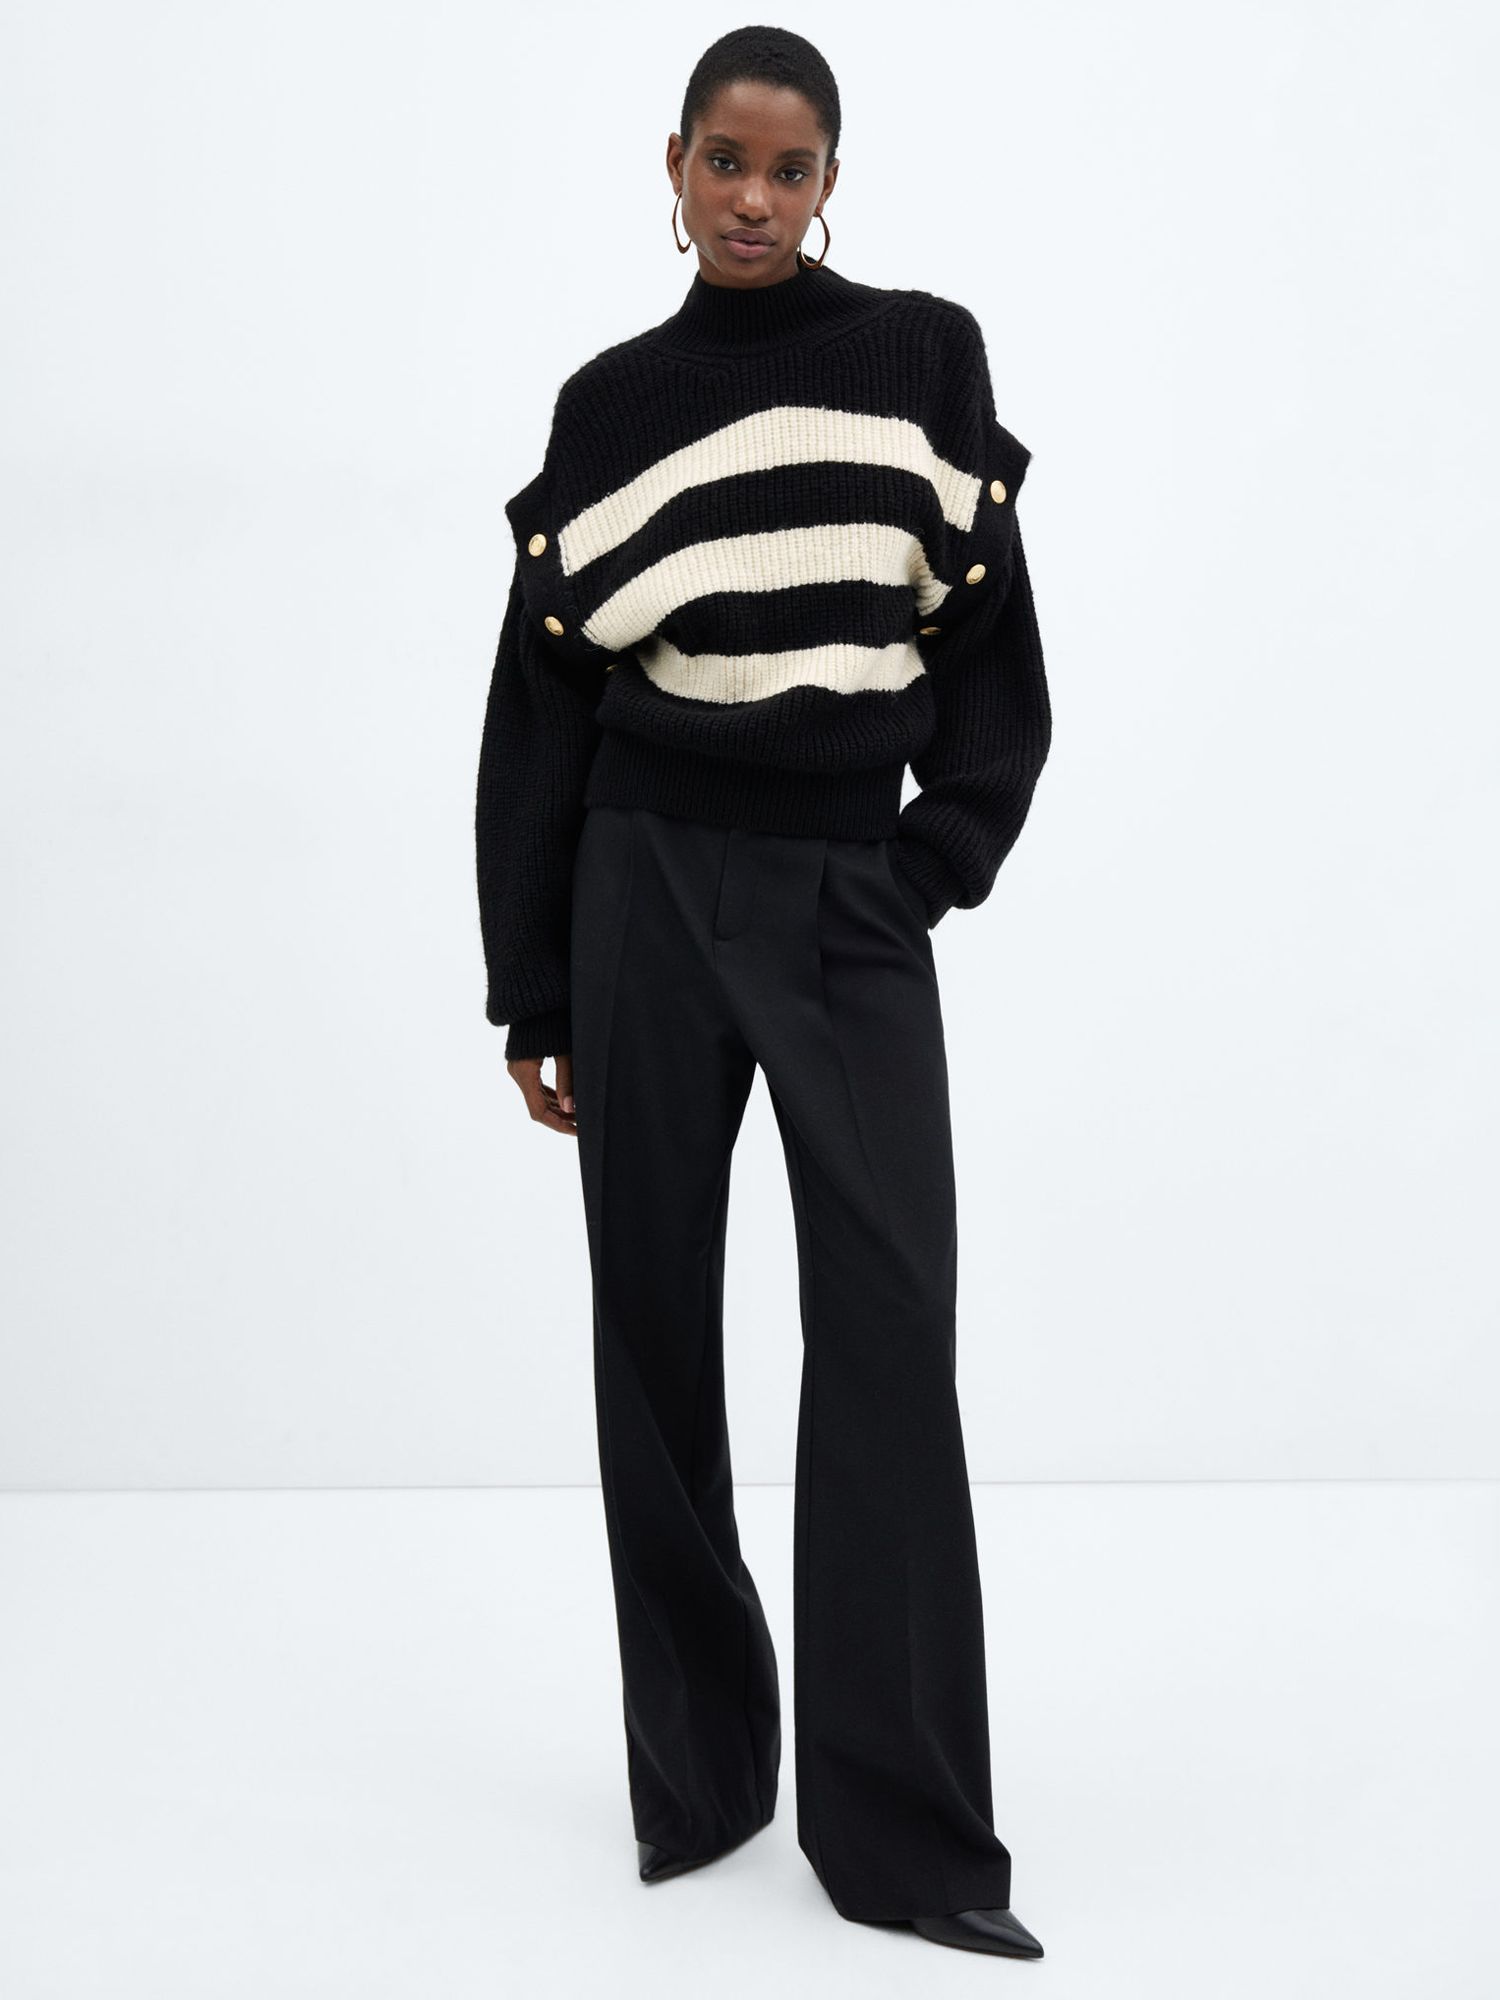 Mango Buttoned Striped Jumper, Black/White at John Lewis & Partners